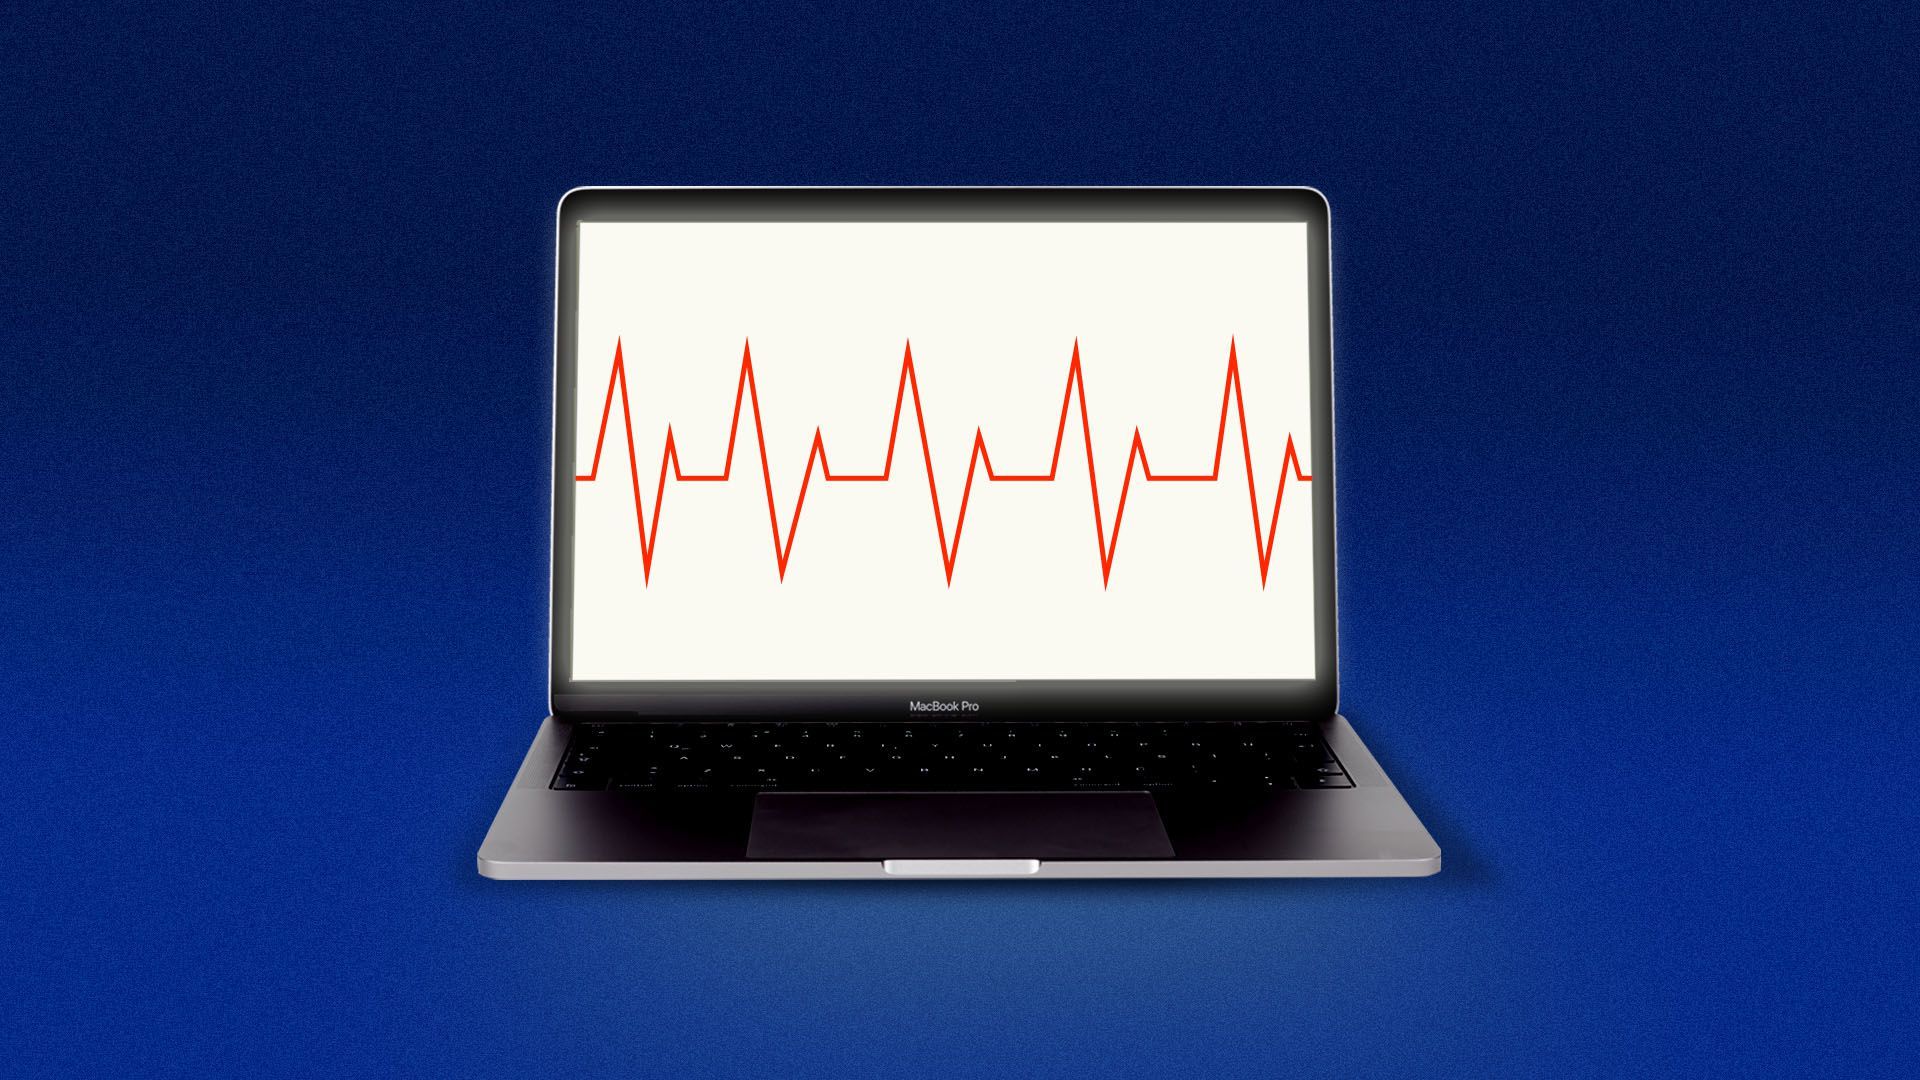 Illustration of an EKG monitor on a laptop screen